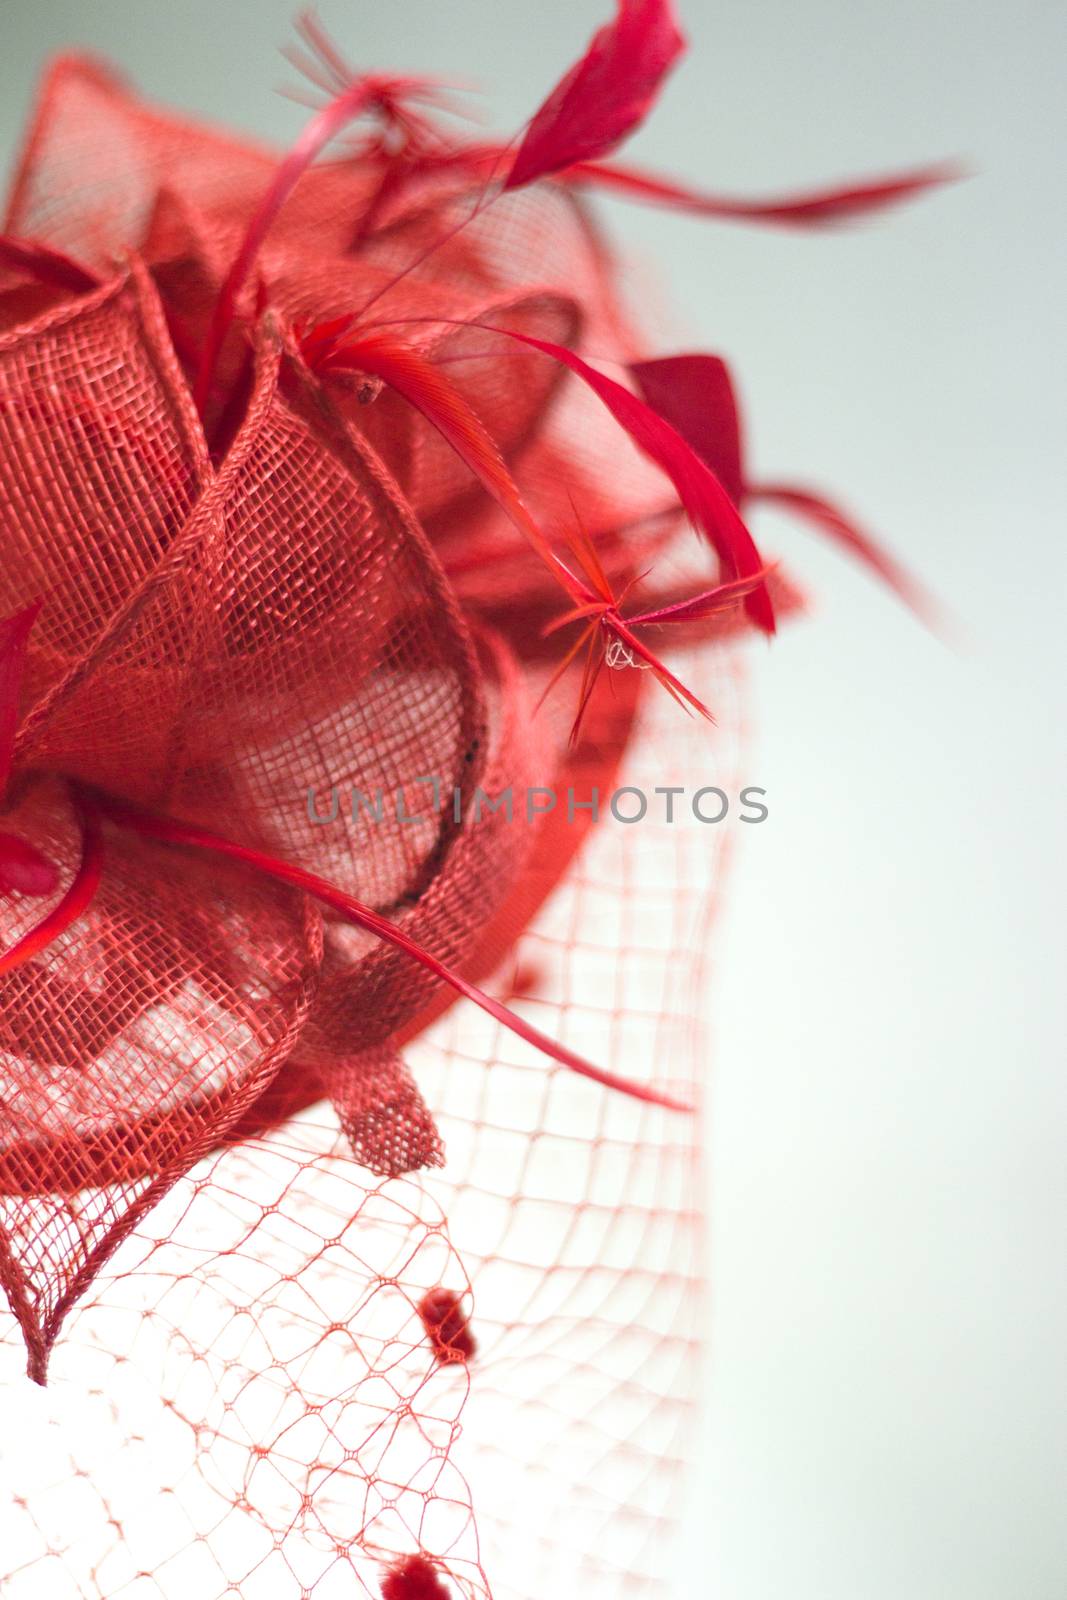 Headdress for lady hair on isolated background by GemaIbarra